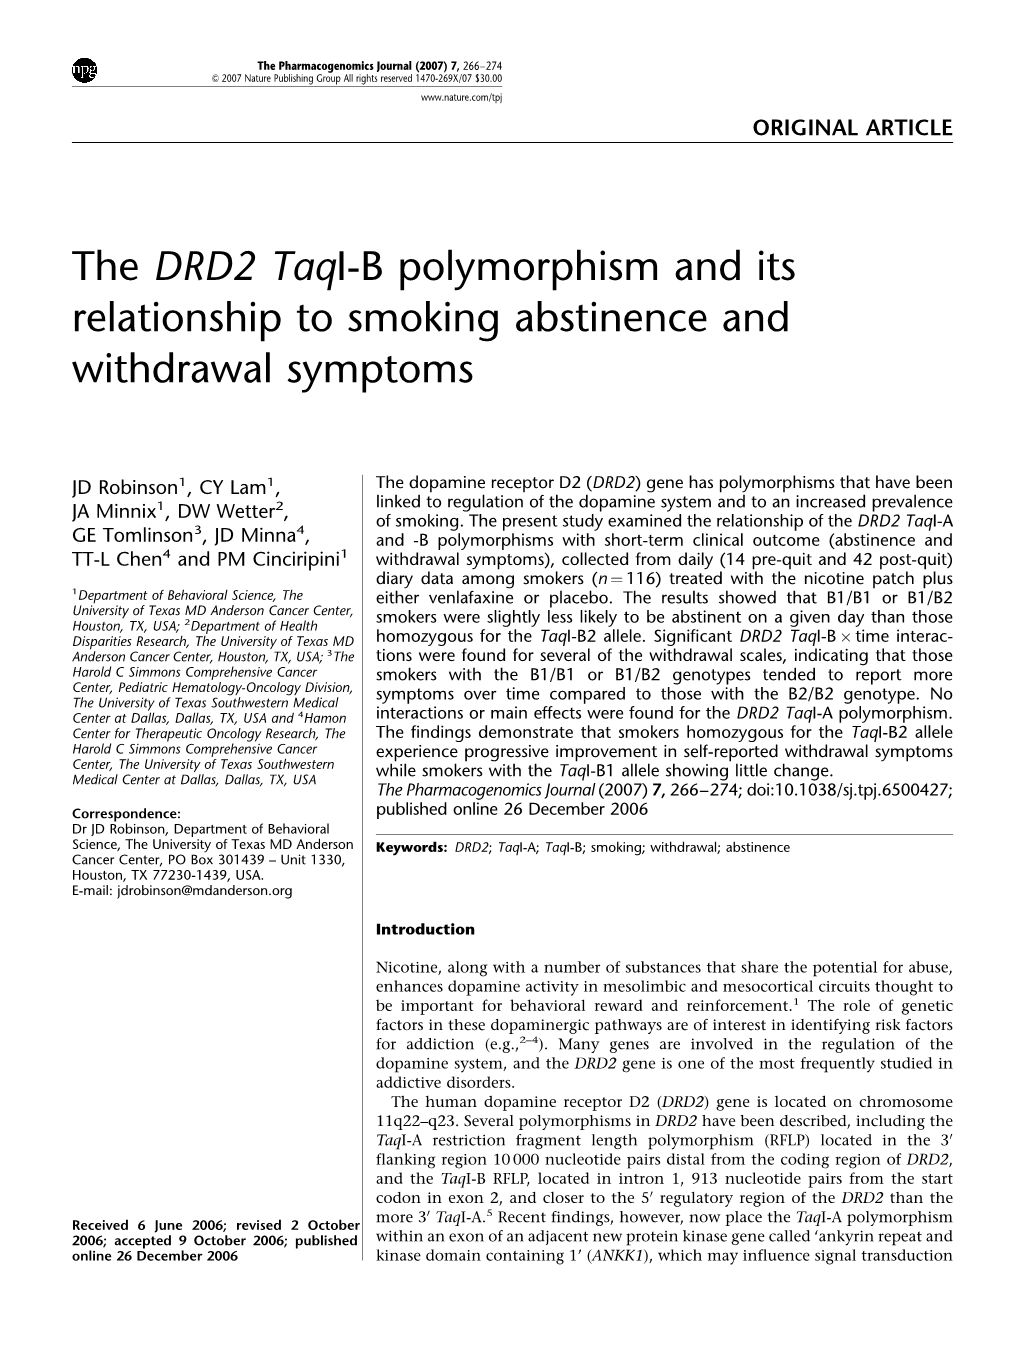 The DRD2 Taqi-B Polymorphism and Its Relationship to Smoking Abstinence and Withdrawal Symptoms